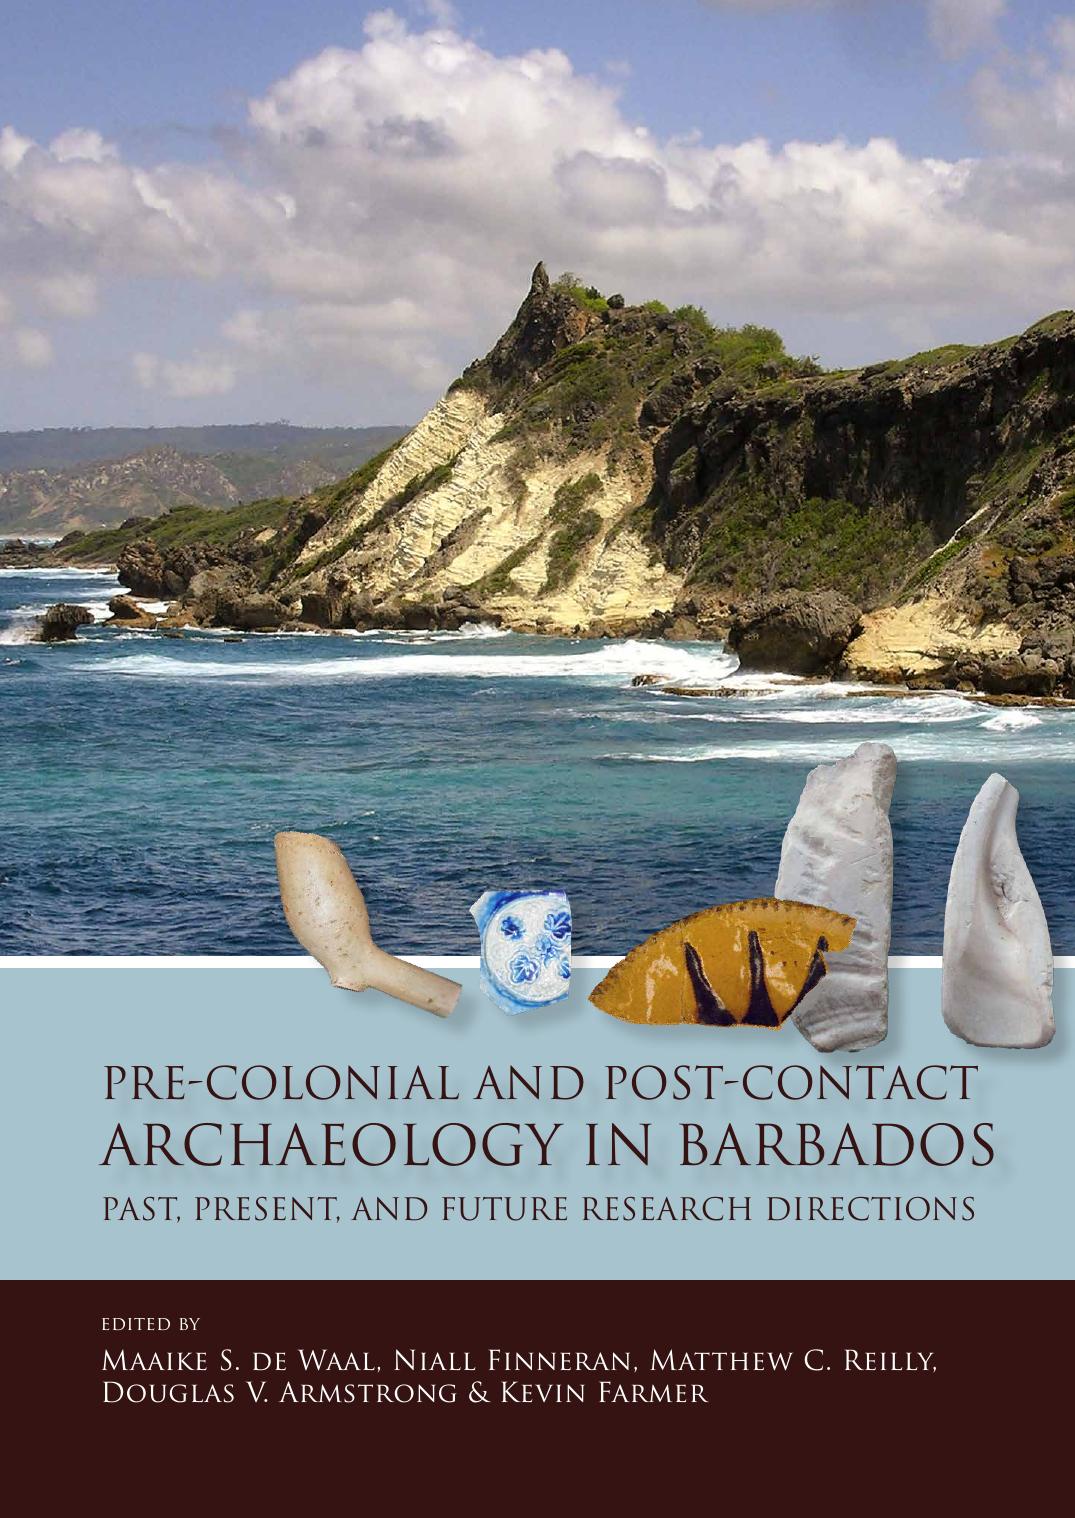 Pre-Colonial and Post-Contact Archaeology in Barbados: Past, Present, and Future Research Directions by Maaike de Waal